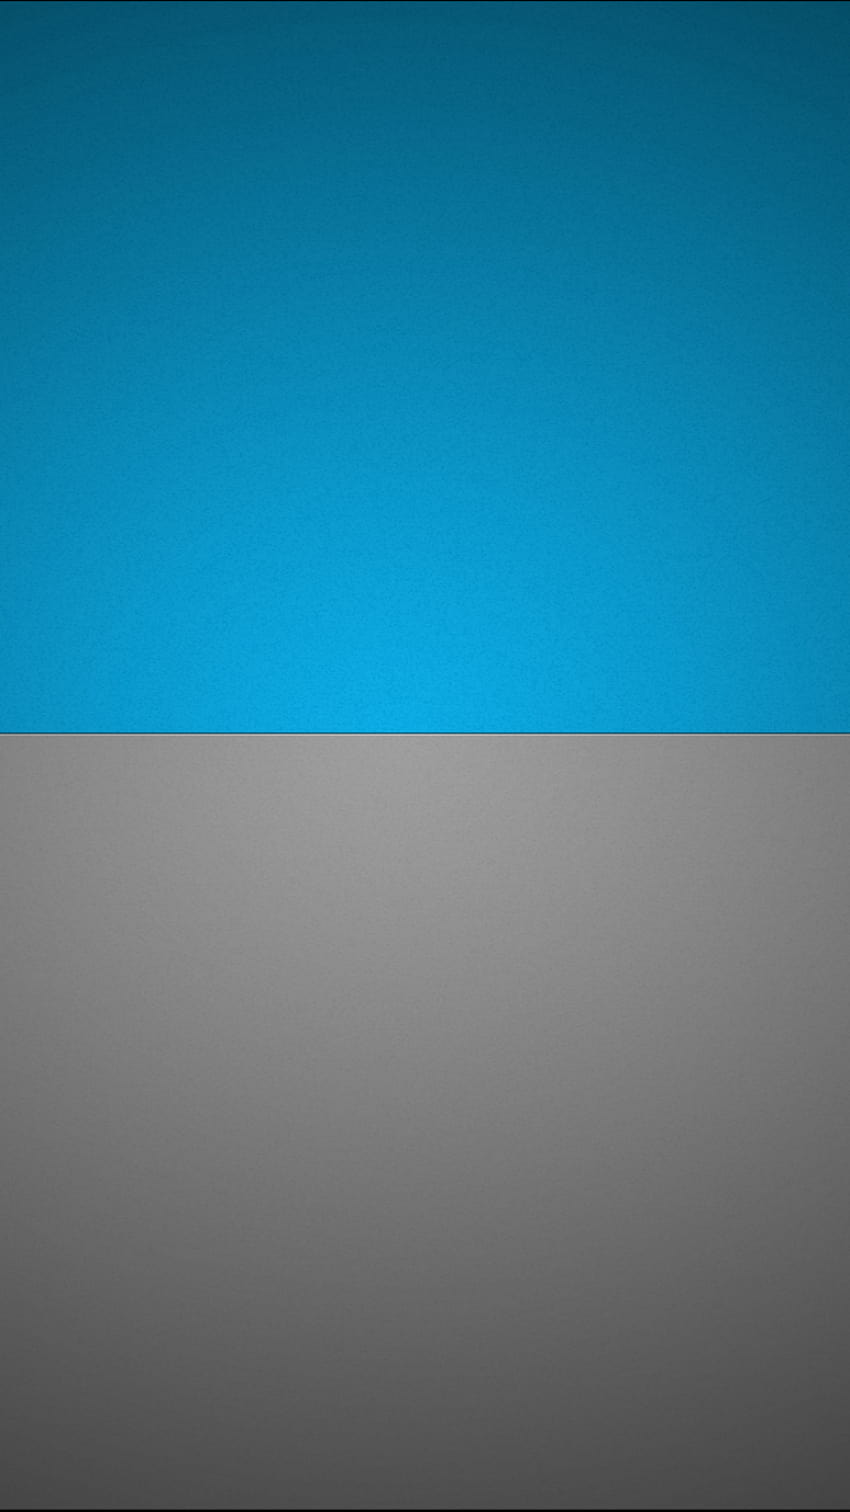 Android application backgrounds design, blue grey mobile HD phone wallpaper  | Pxfuel